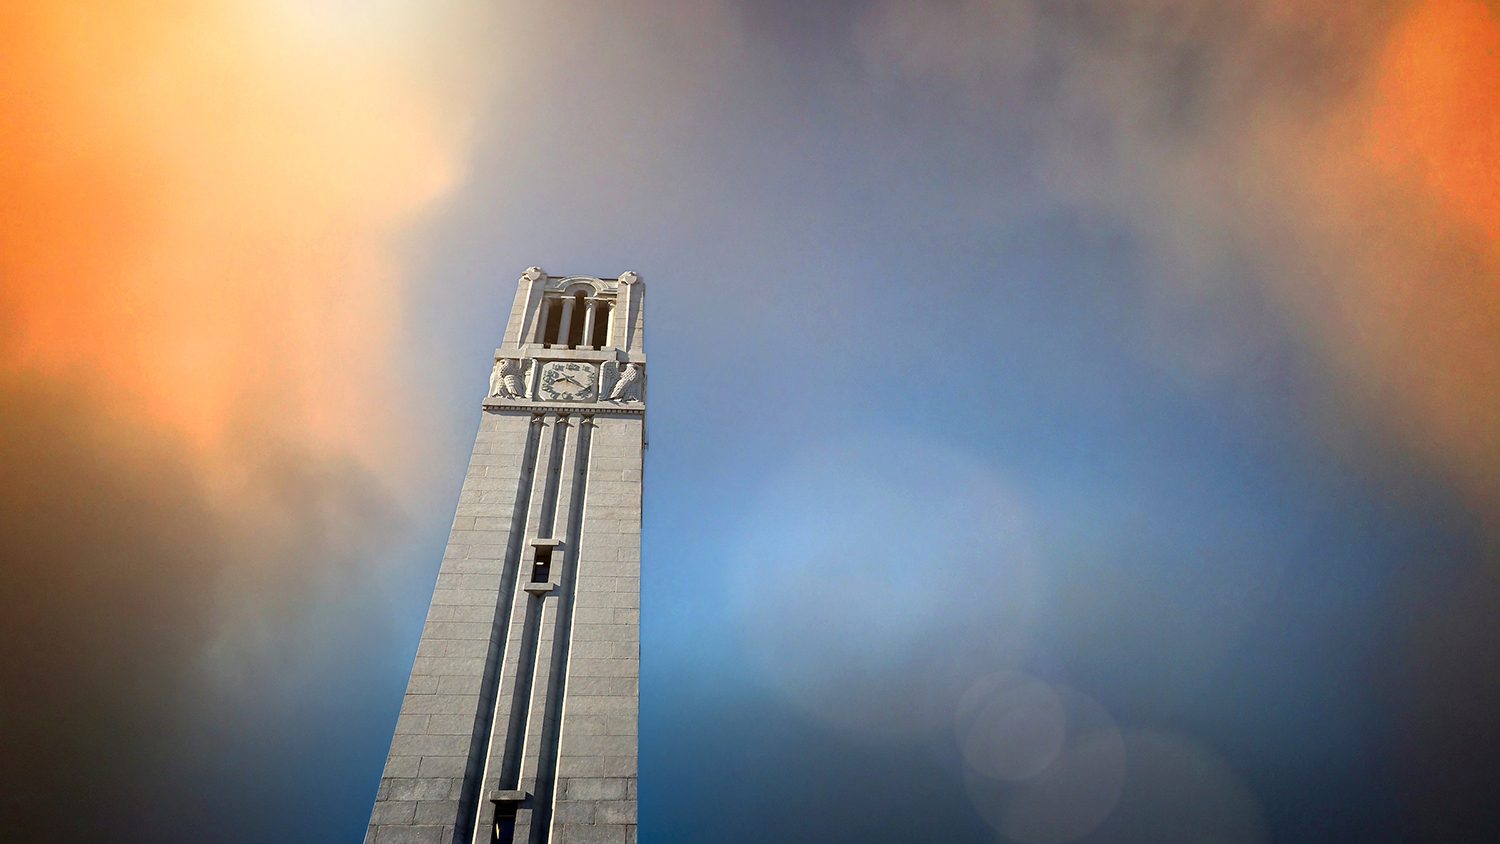 The NC State belltower on main campus at sunset.